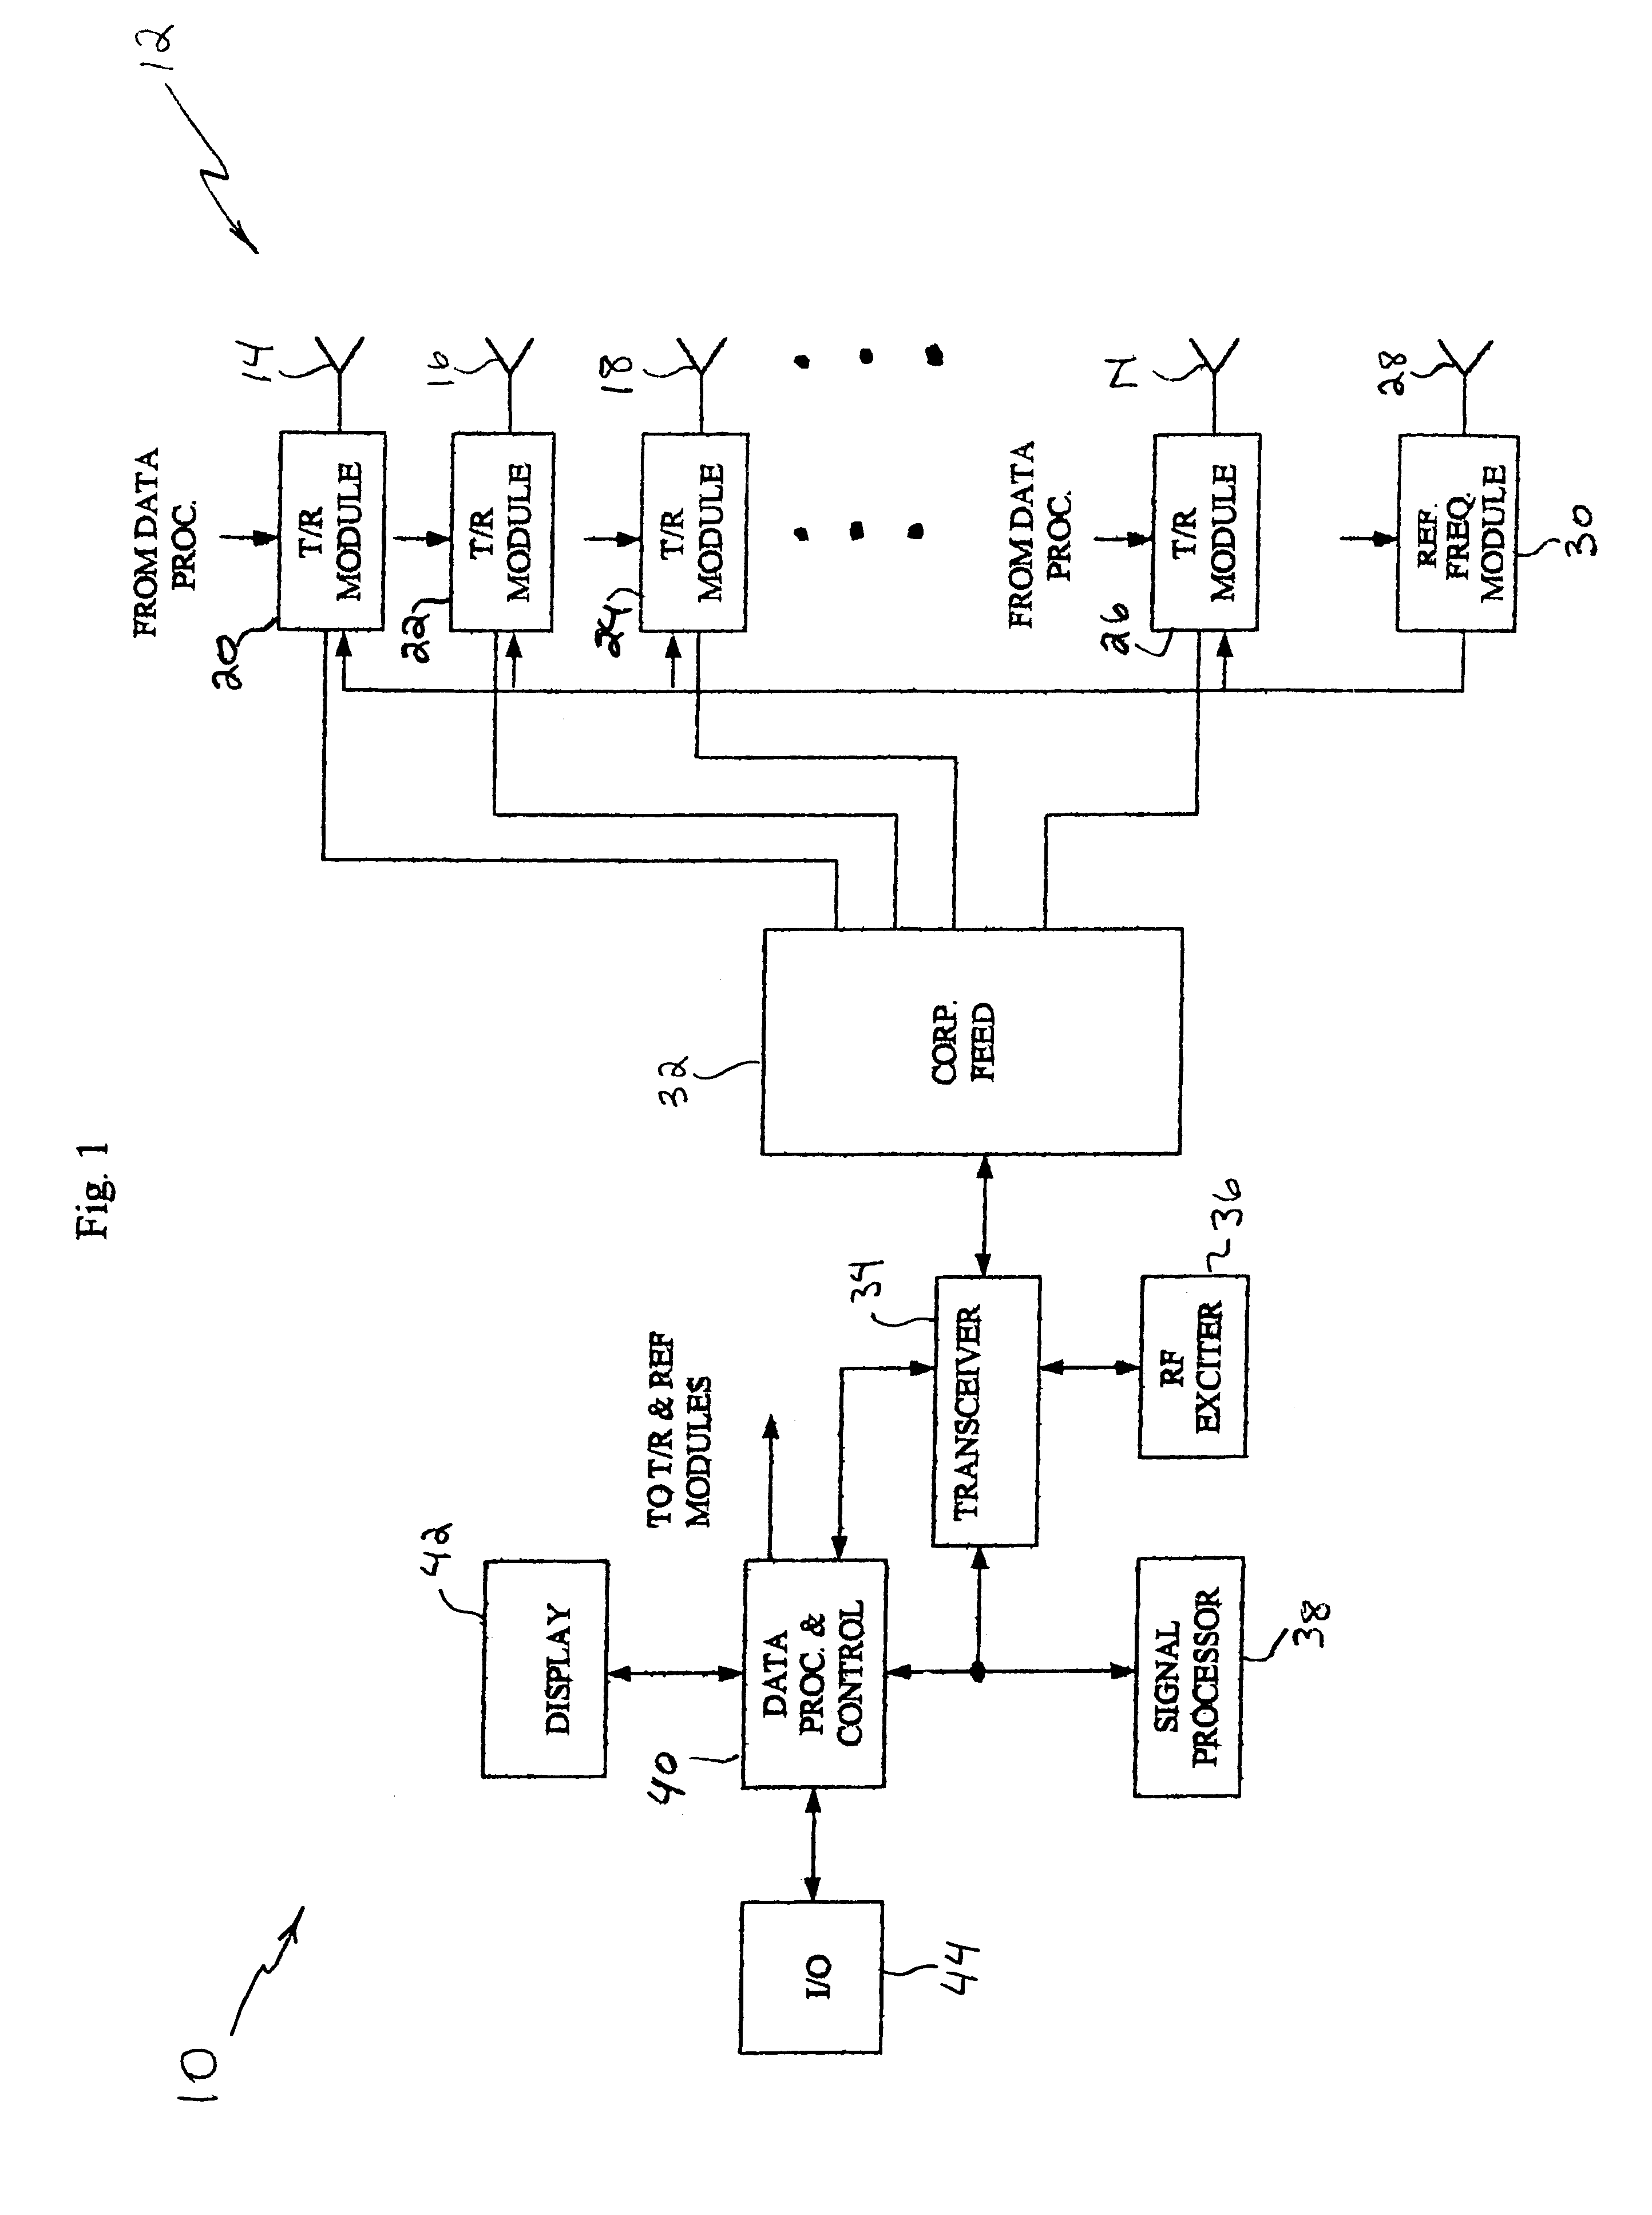 System and method for redirecting a signal using phase conjugation